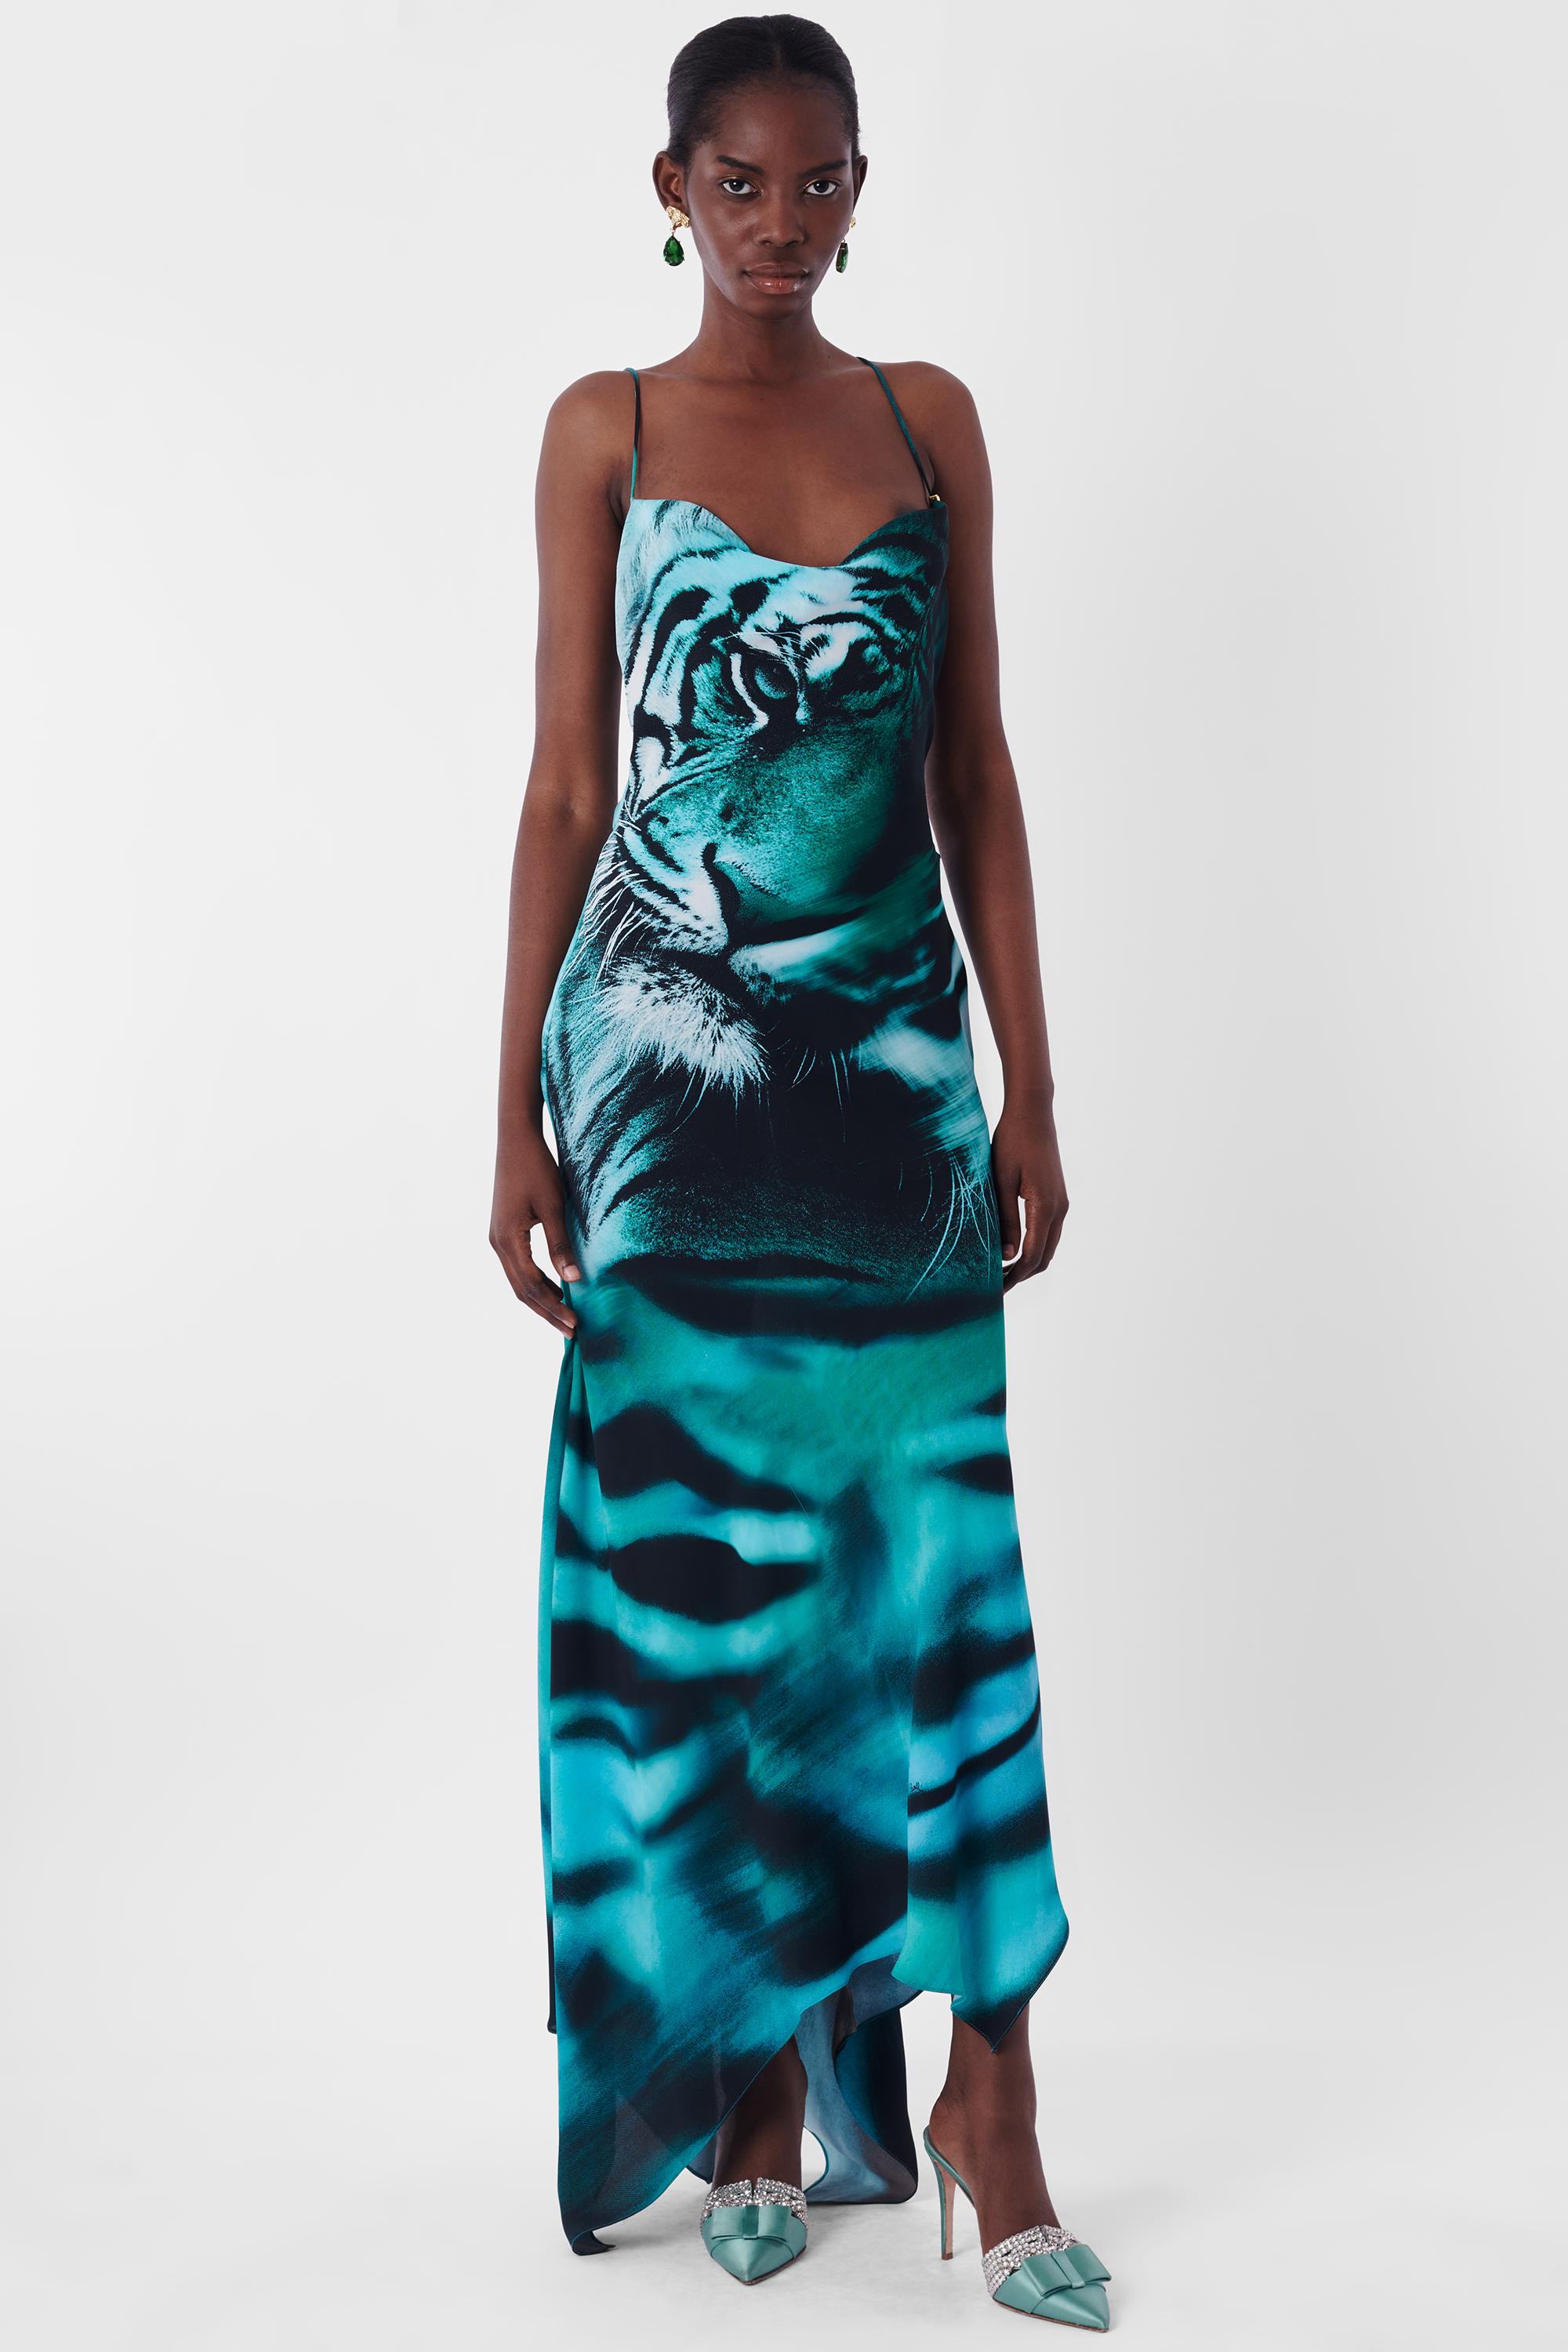 Roberto Cavalli S/S 2022 Blue Tiger Dress. Features cowl neck, open back with concealed zipper, gold tiger teeth on straps, asymmetric hem. In excellent vintage condition. As seen on Dua Lipa.

Brand: Roberto Cavalli
Size: UK 8
Color: Blue
Label